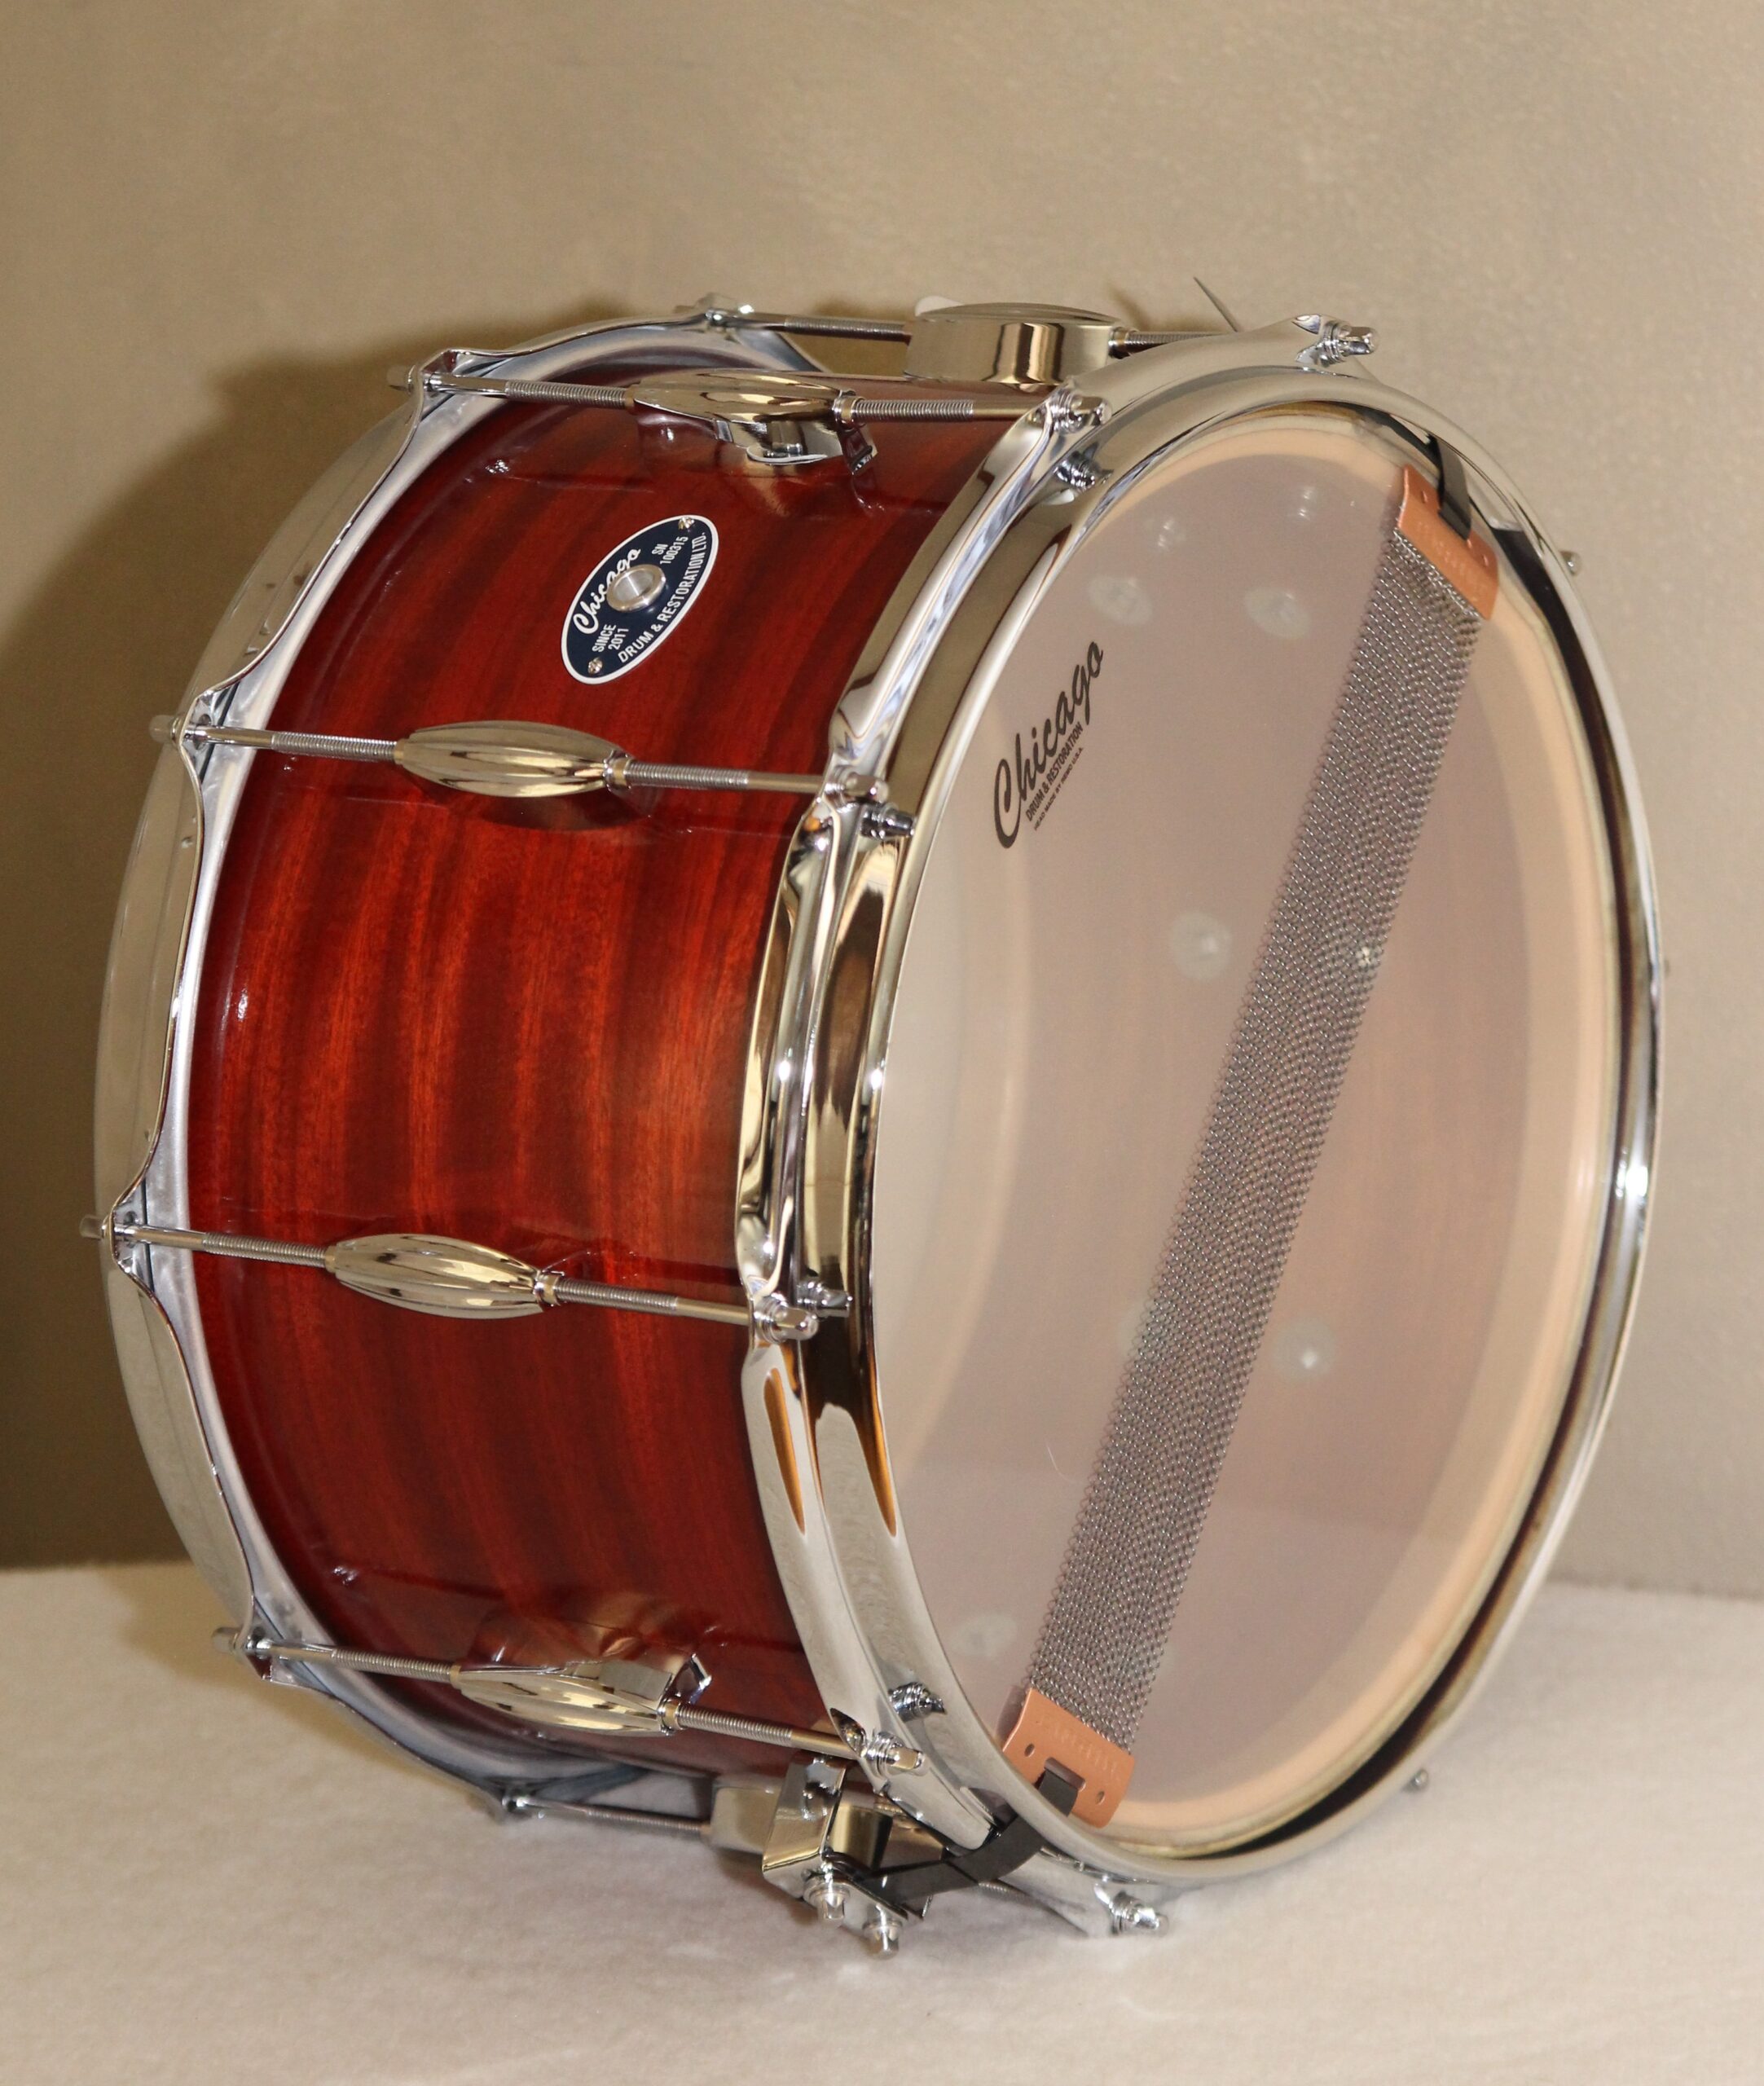 Snare Drum - 7" Mahogany with Red Stain